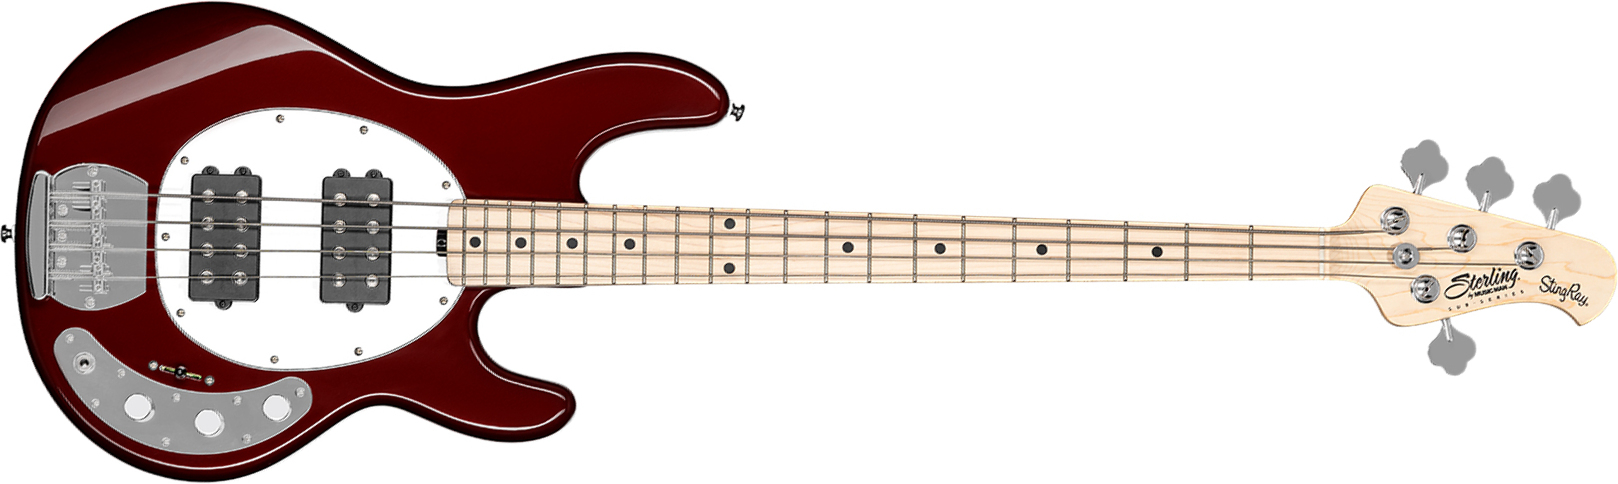 Sterling By Musicman Stingray Ray4hh Active Mn - Candy Apple Red - Bajo eléctrico de cuerpo sólido - Main picture